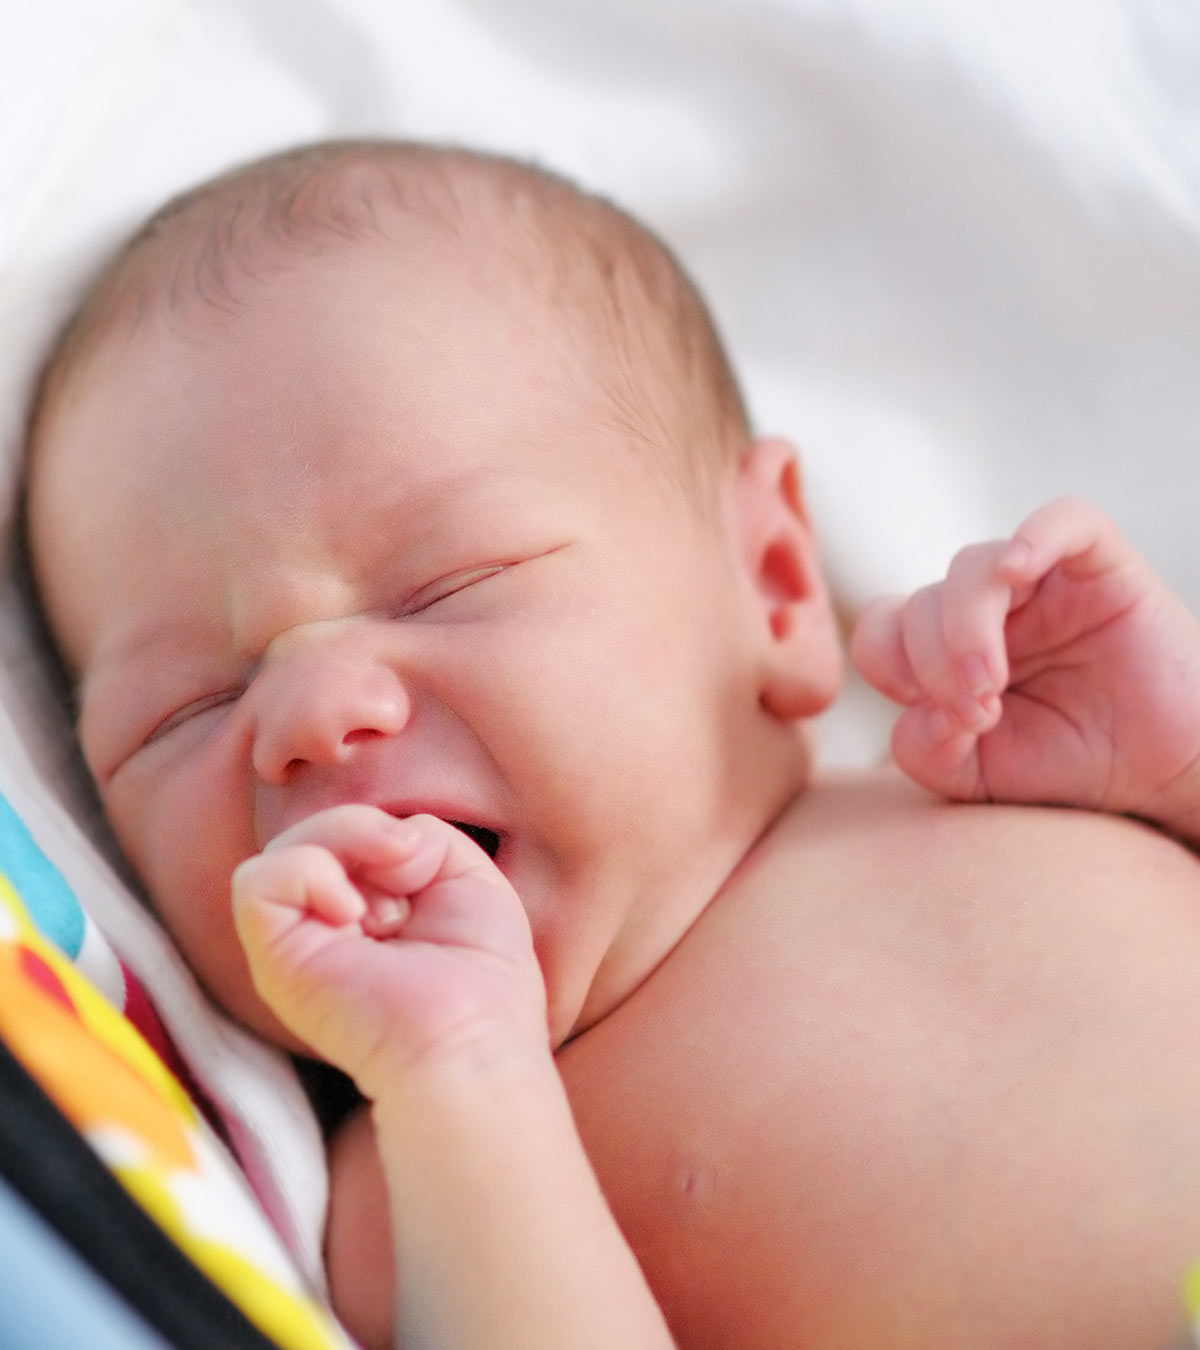 Why Does Your Baby Sigh During Sleep?